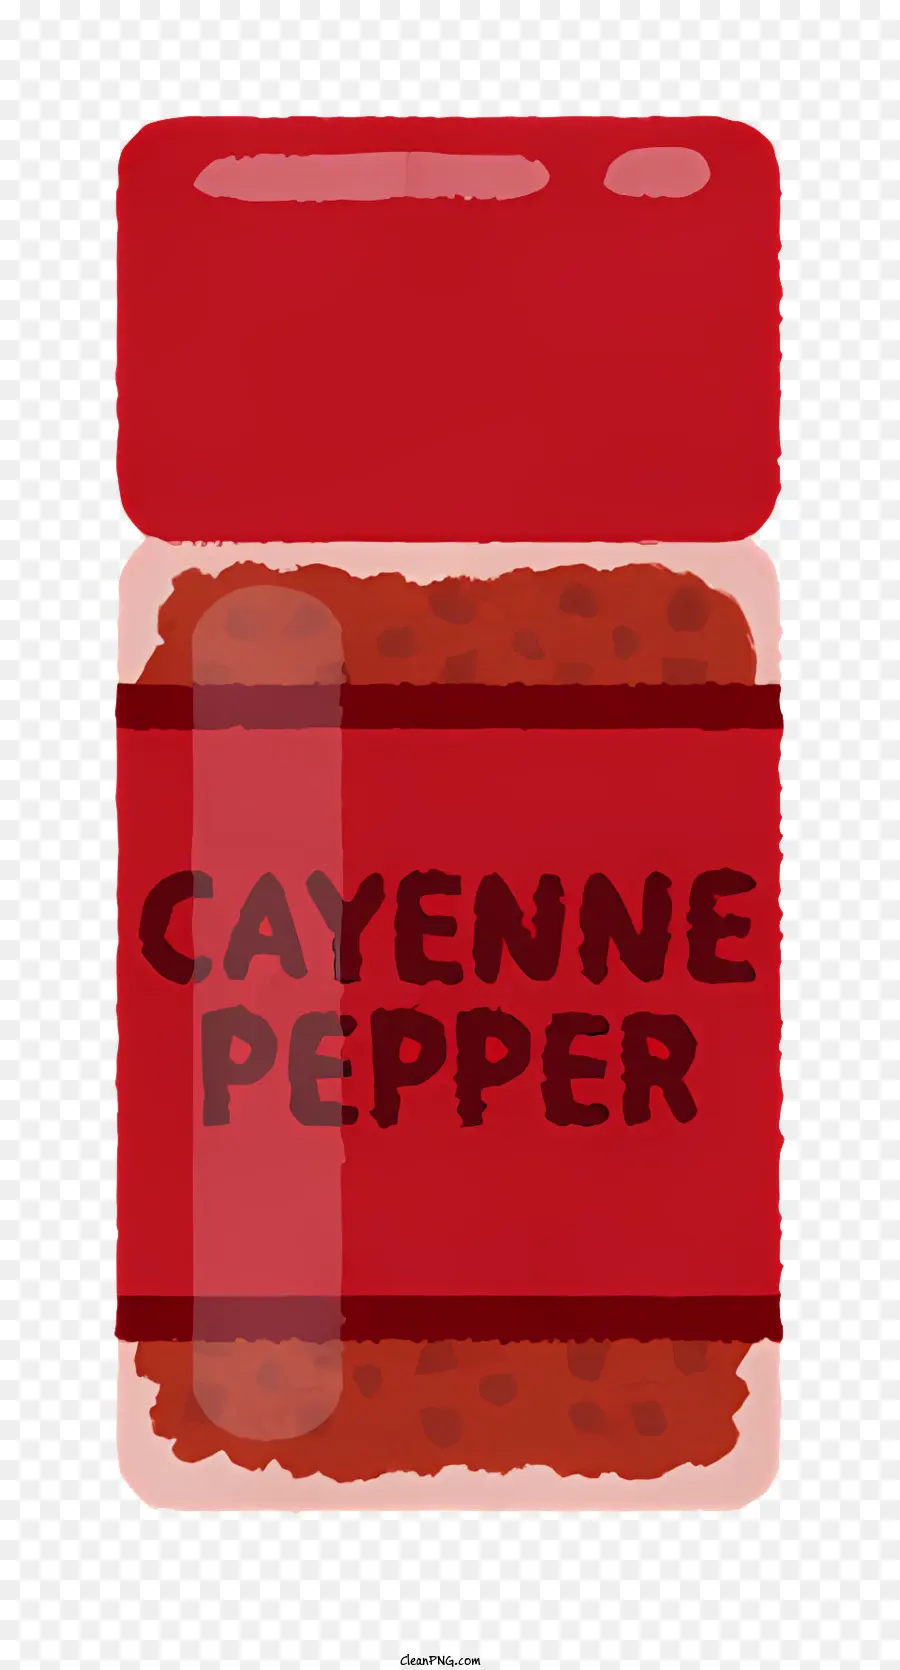 seasoning elements canned peppers cayenne pepper jar of peppers red peppers